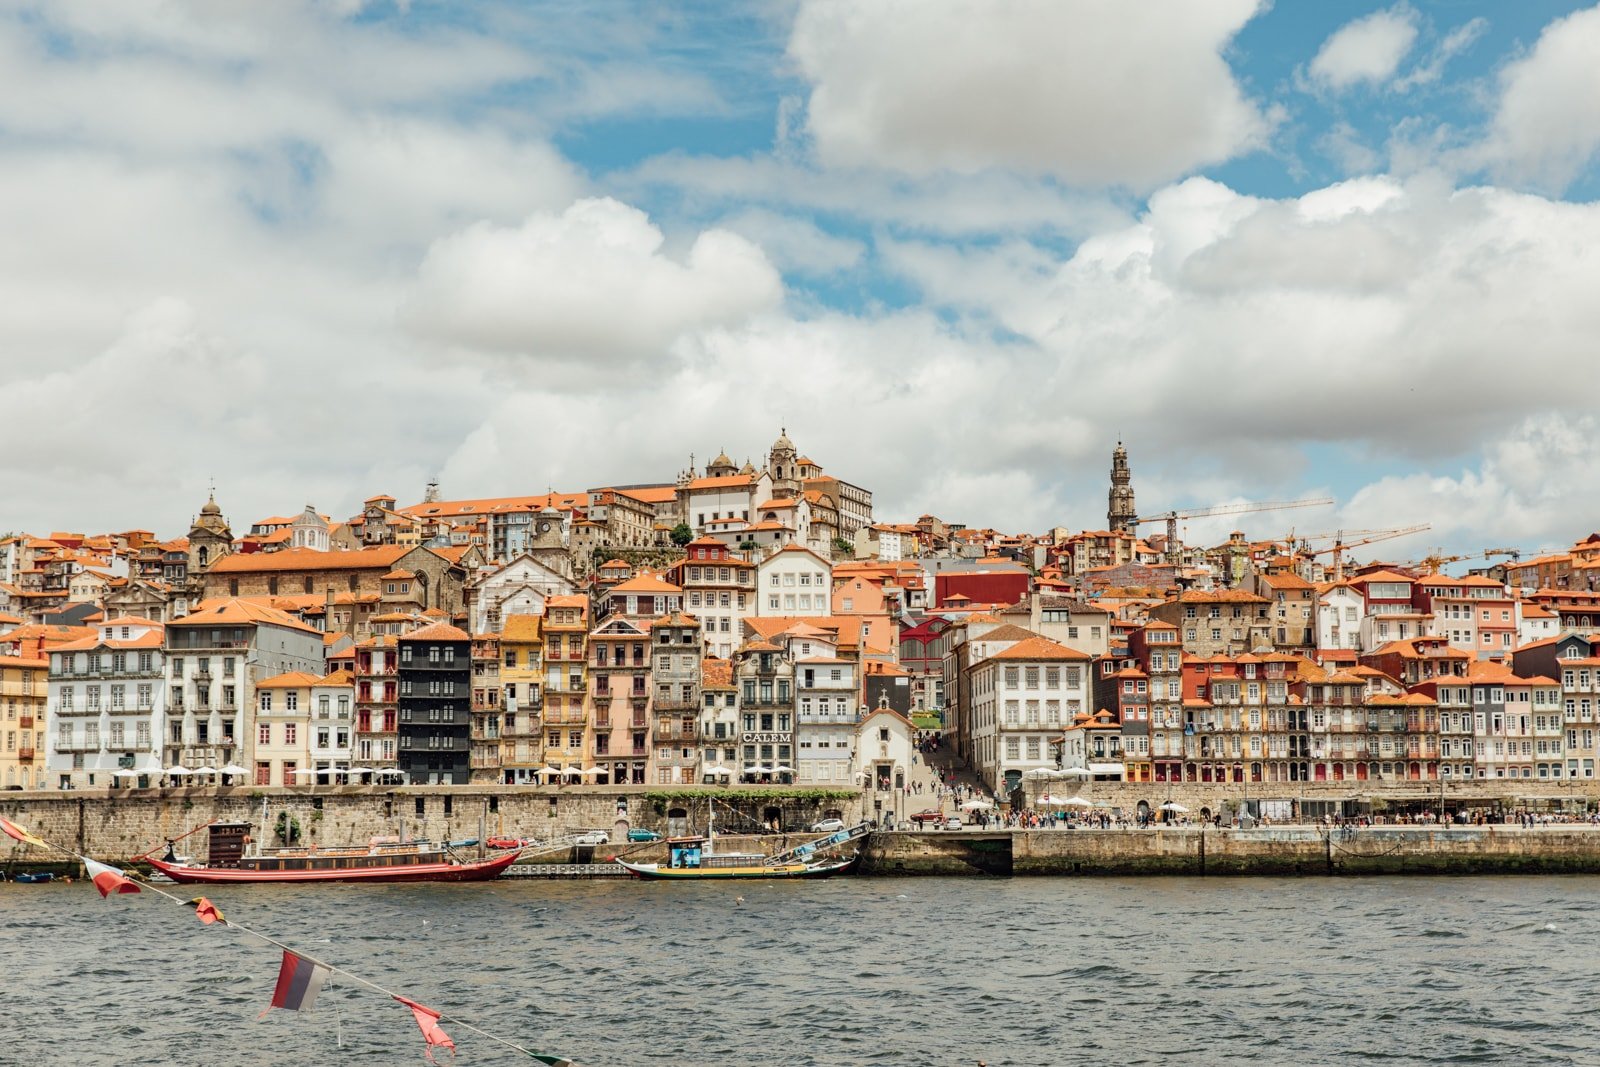 Porto was elected as one of the "movie treasures" in Europe